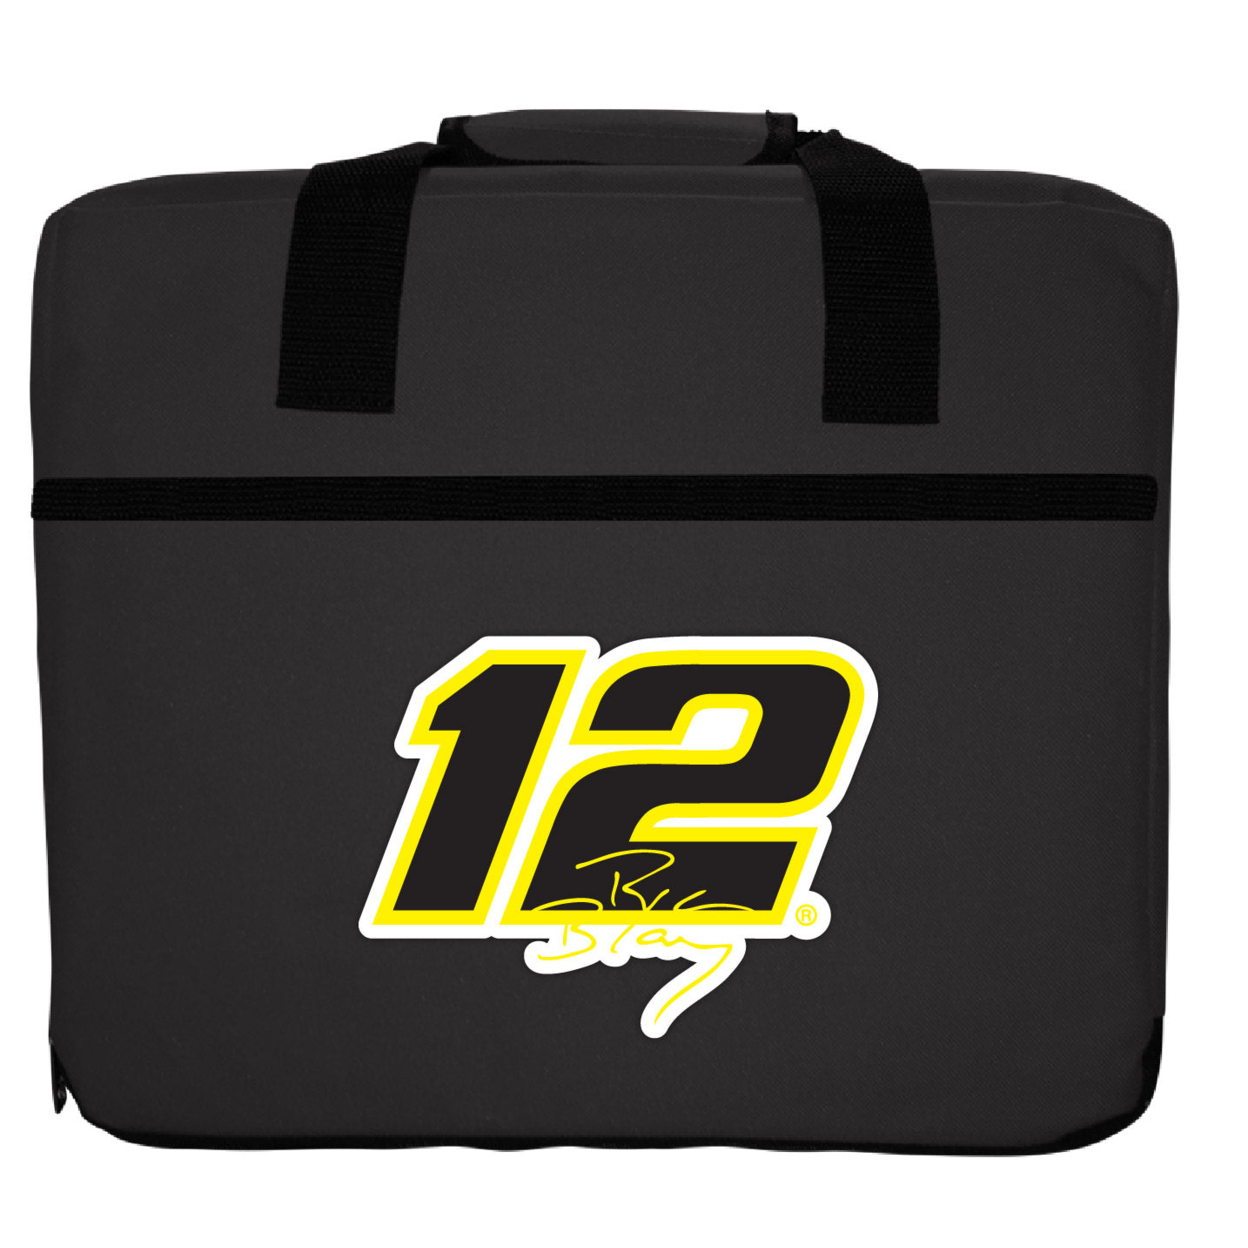 R And R Imports Officially Licensed NASCAR Ryan Blaney #12 Single Sided Seat Cushion New For 2020